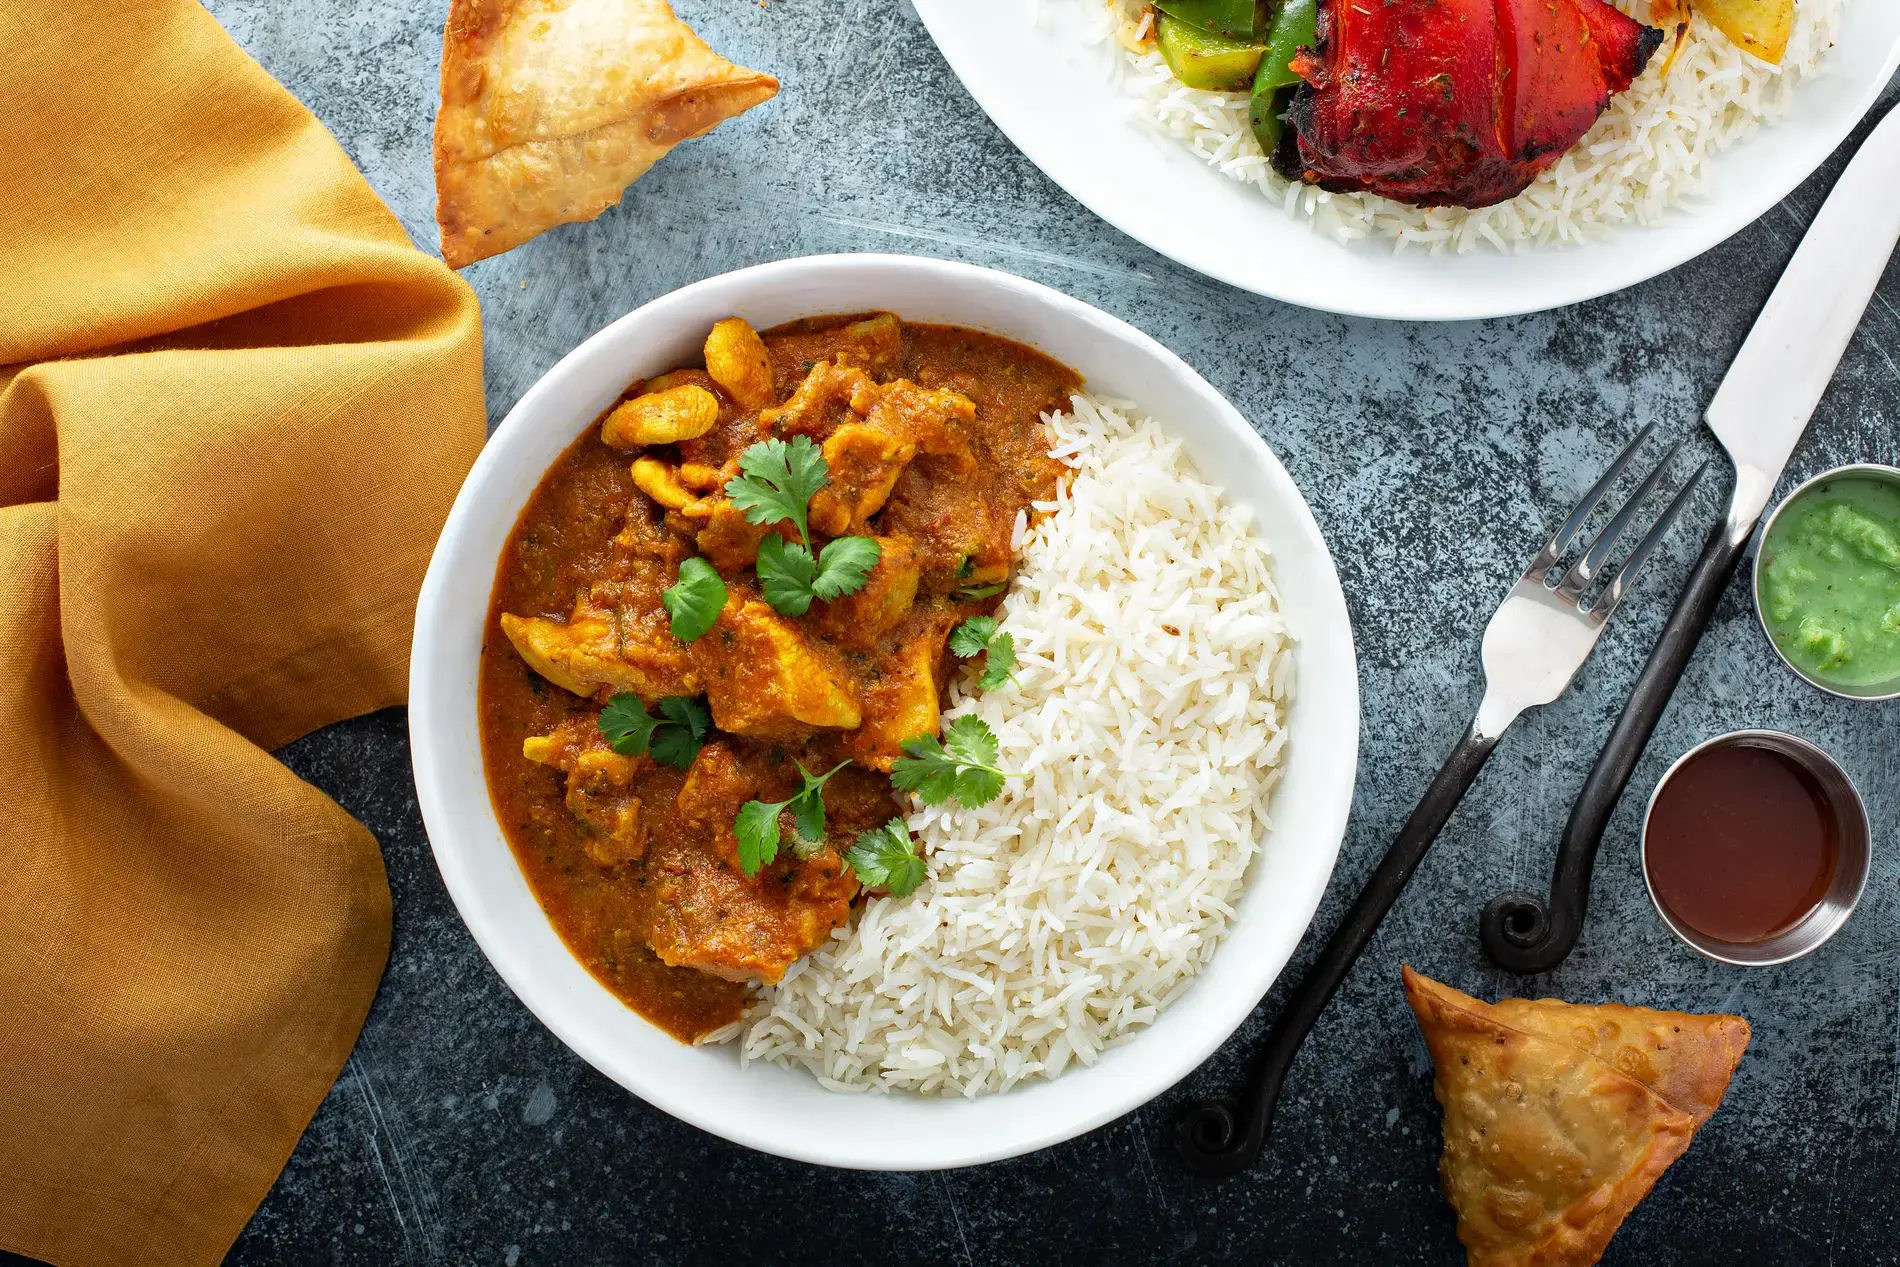 A delicious meal in under 30 minutes? Check out our chicken curry with rice! 